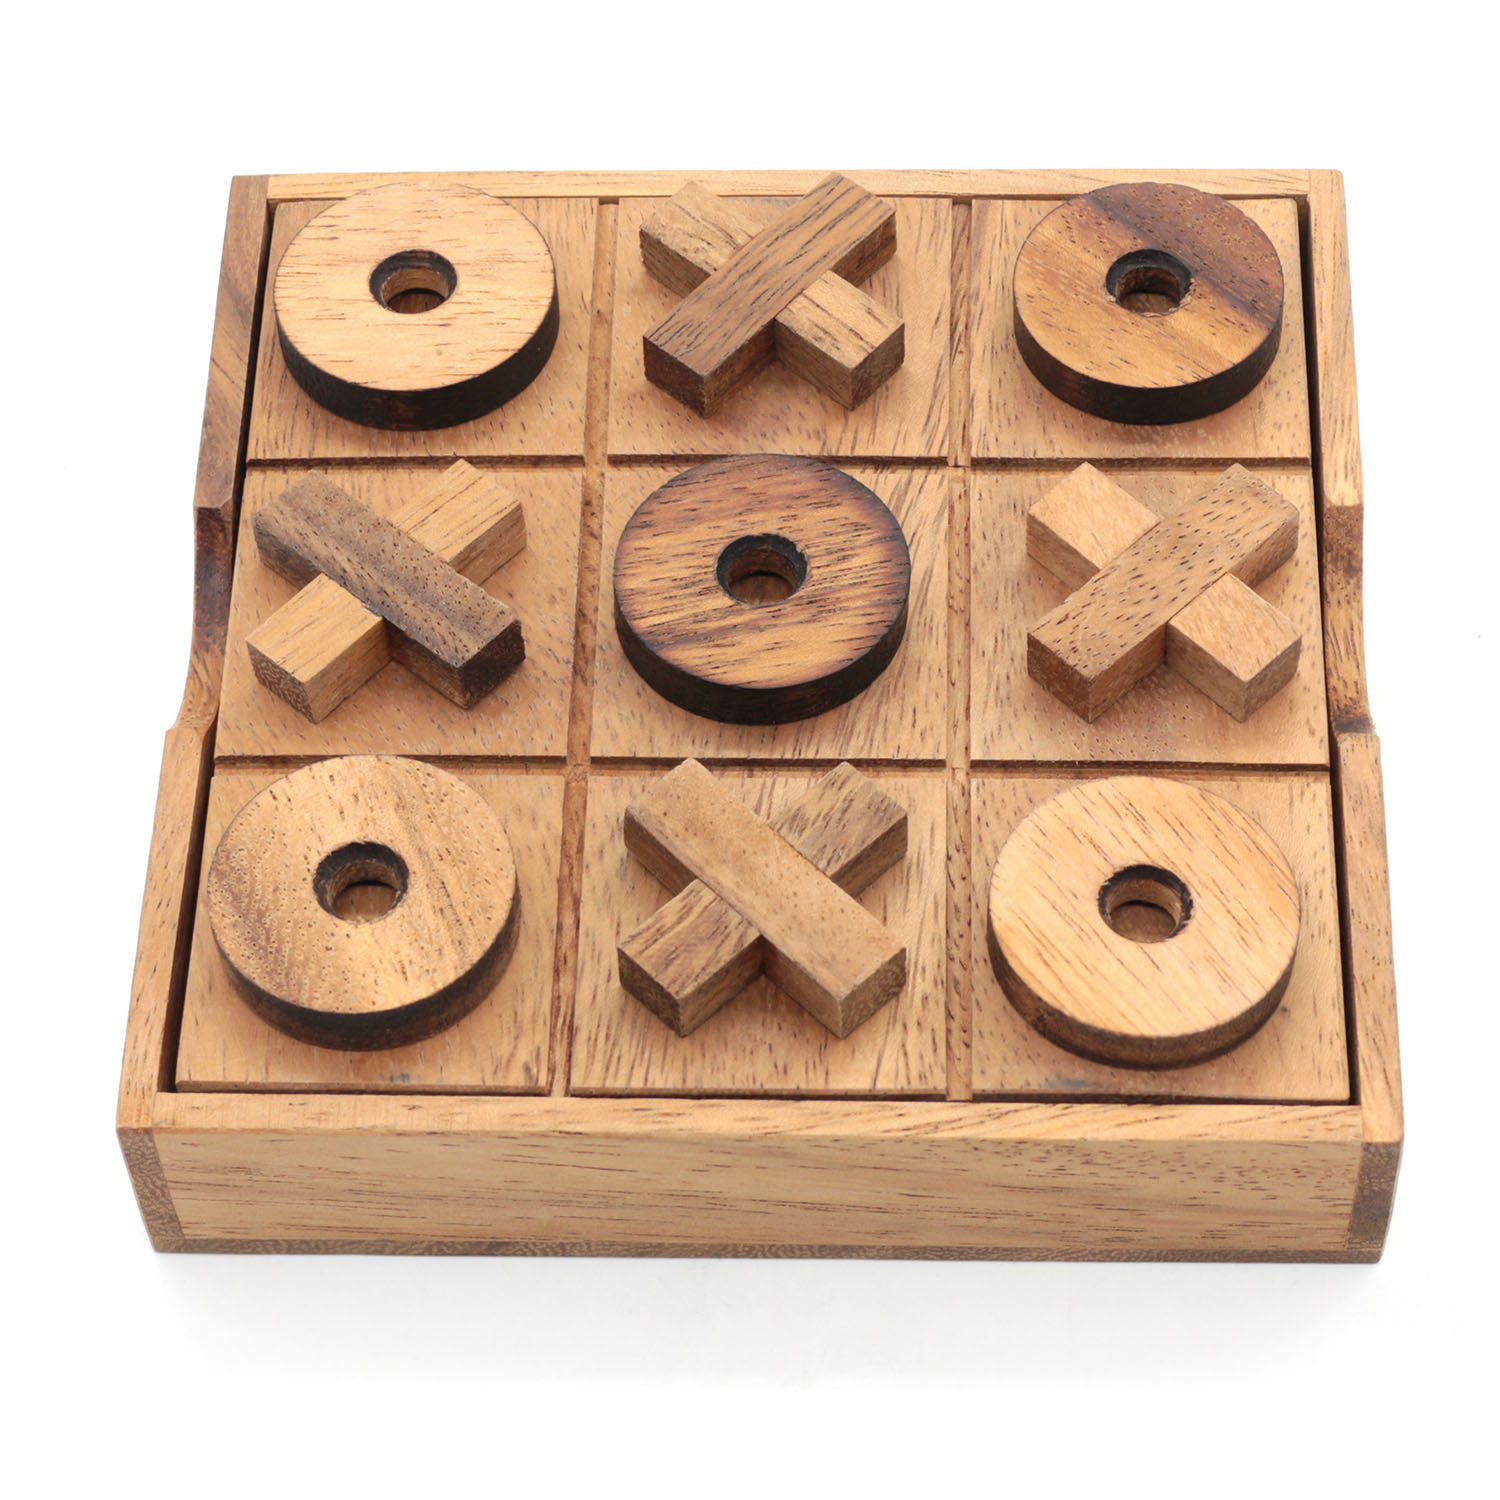 3D Tic Tac Toe Wooden Game and Coffee Table Decoration – BSIRI GAMES